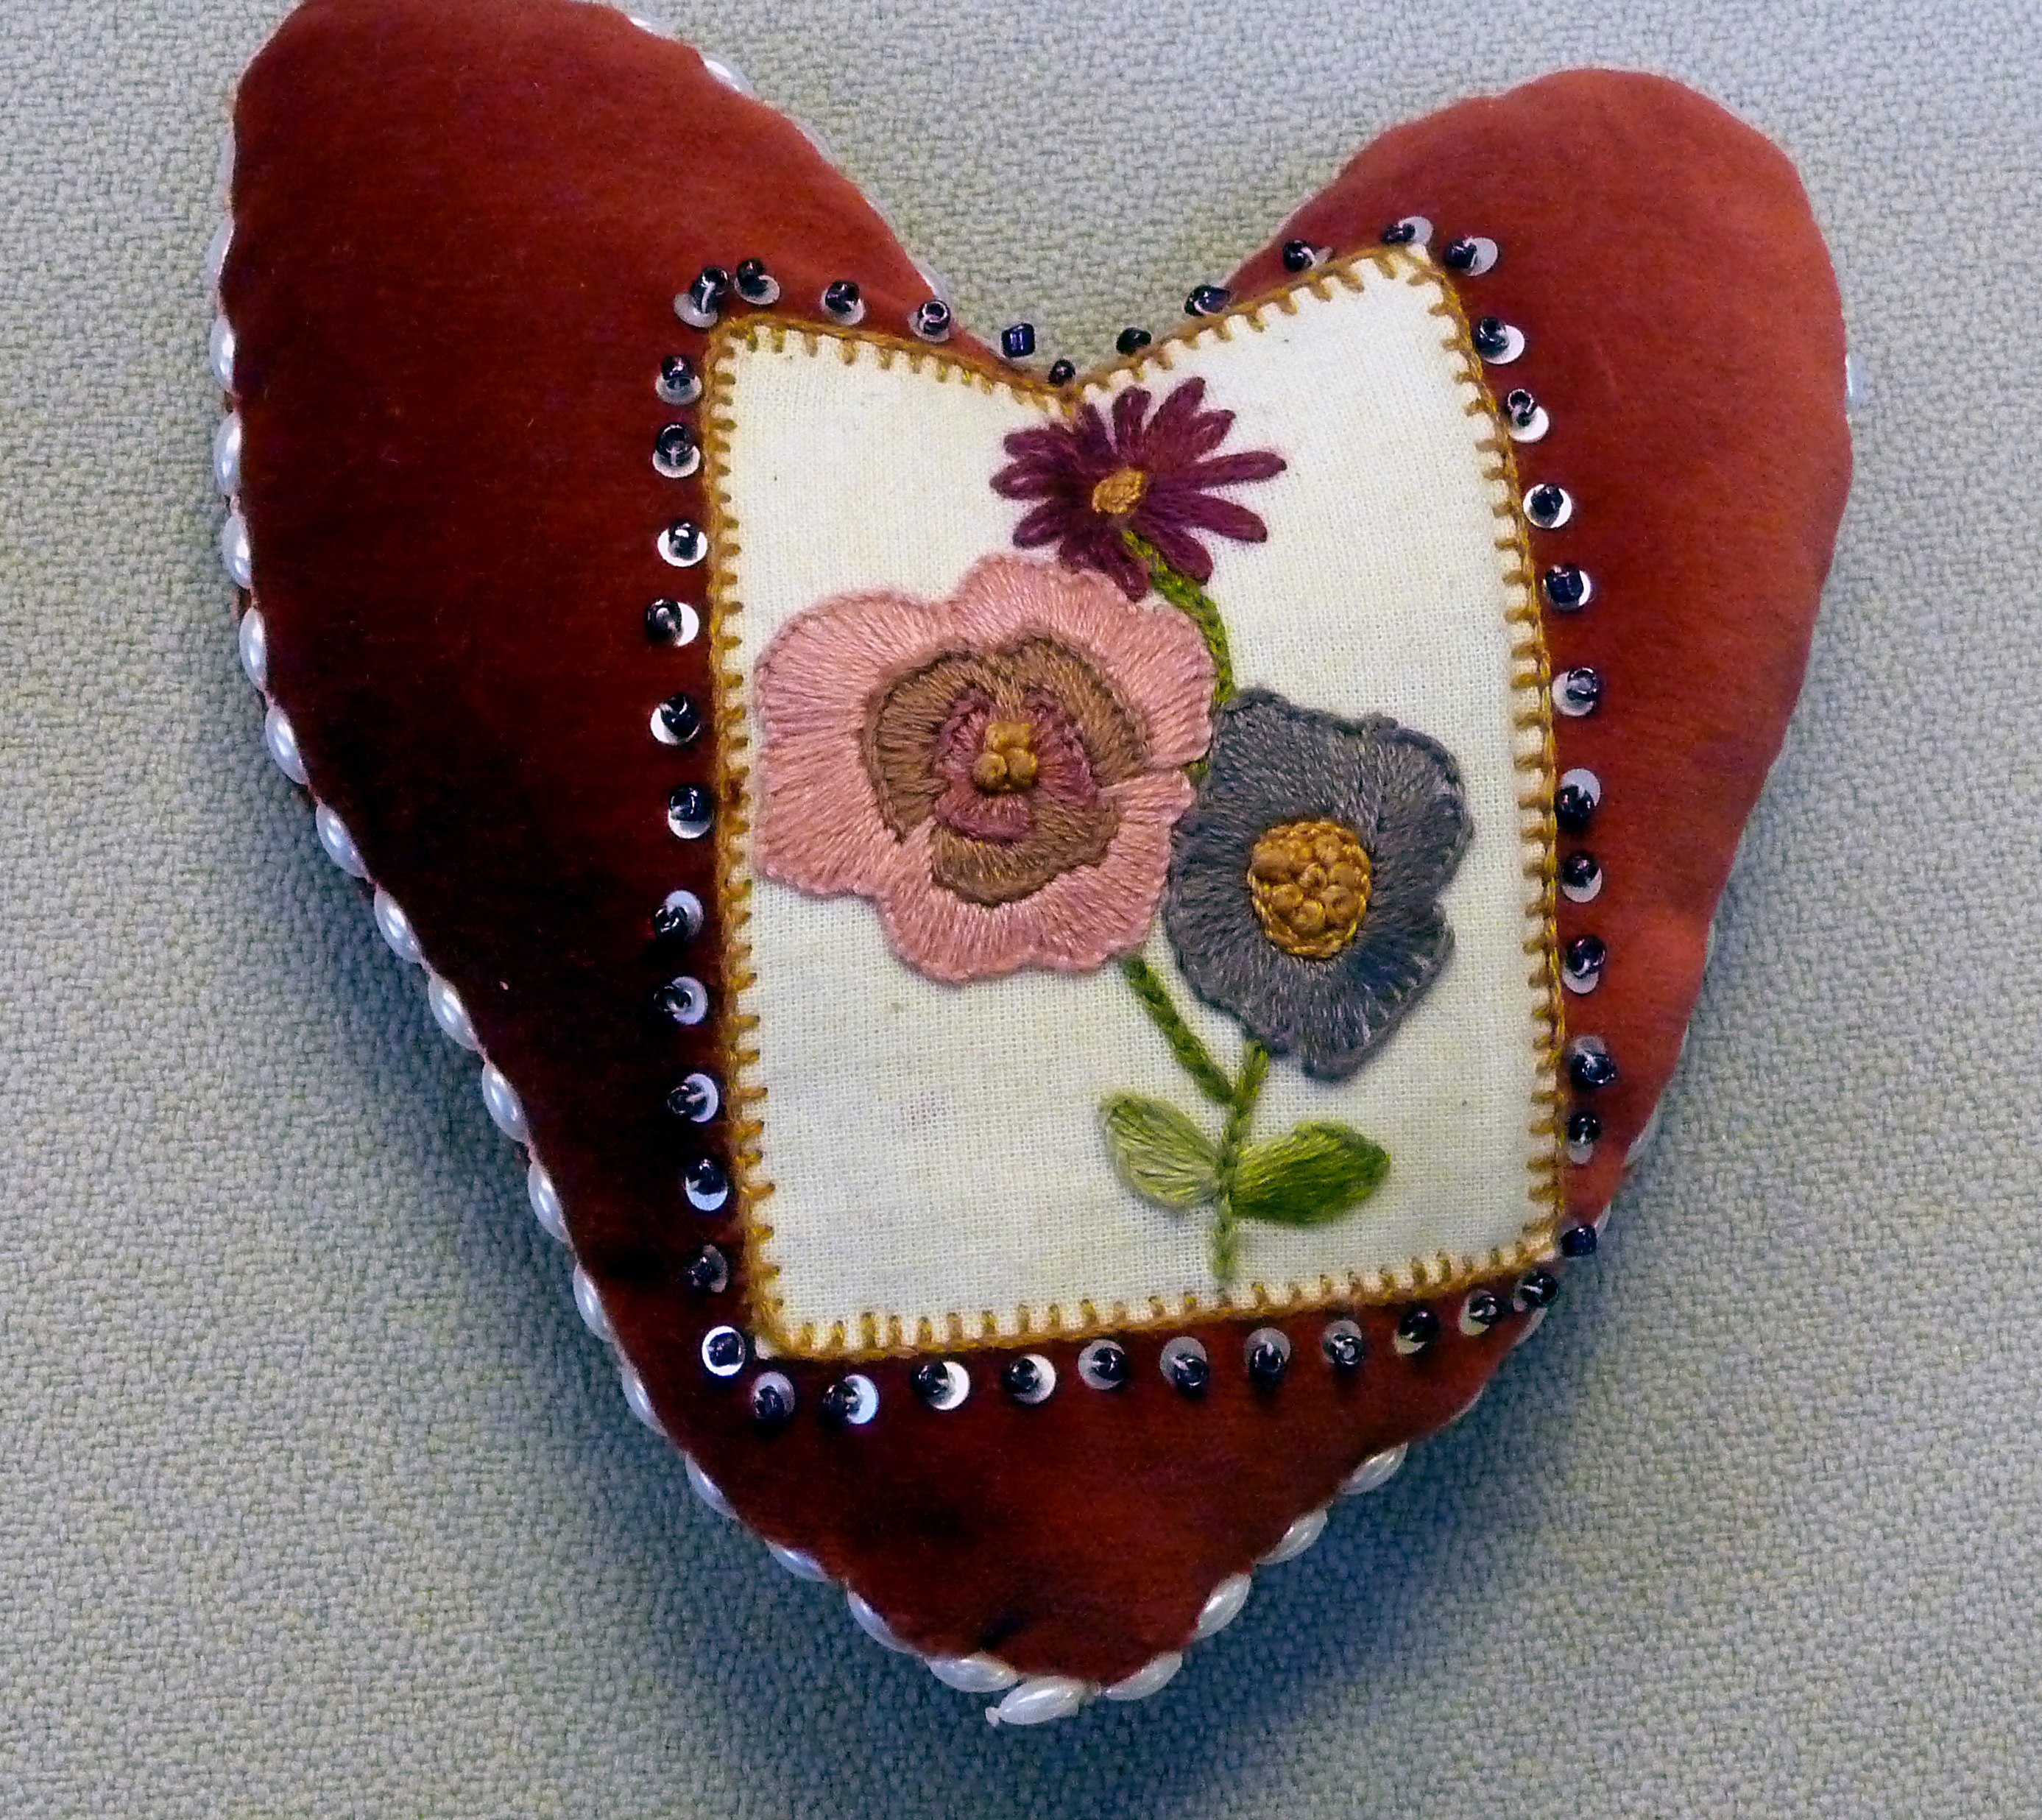 pincushion to commemorate World War 1  made by Becky Waite